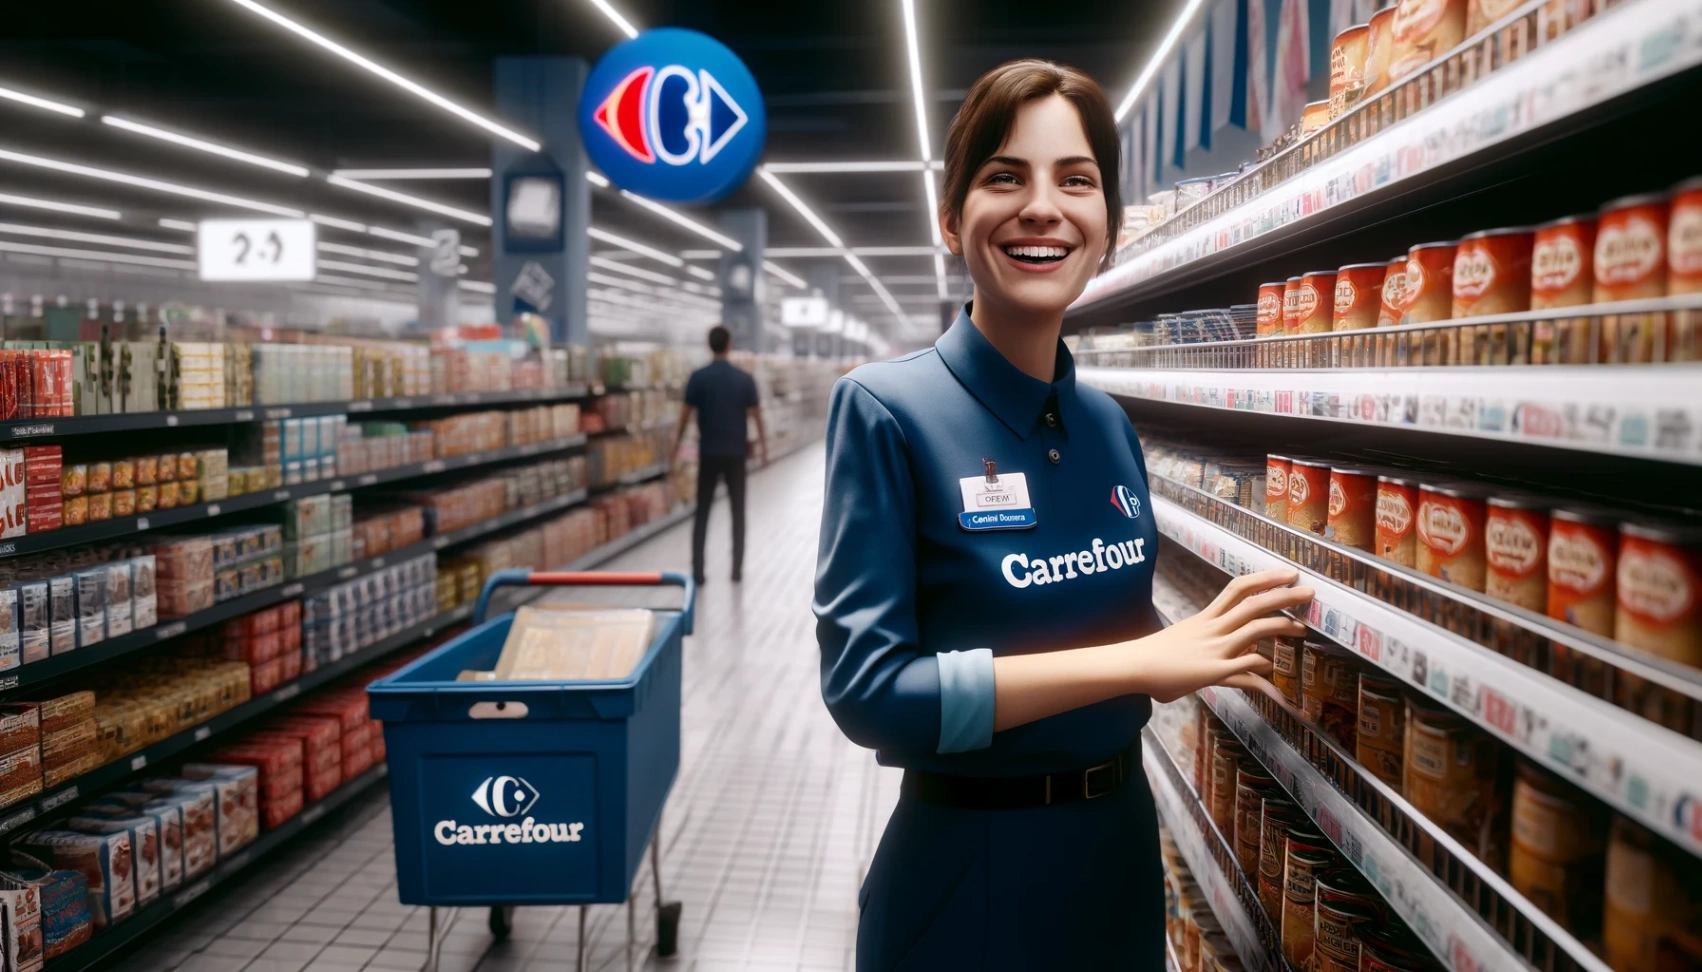 Carrefour Jobs Openings - Learn How to Apply